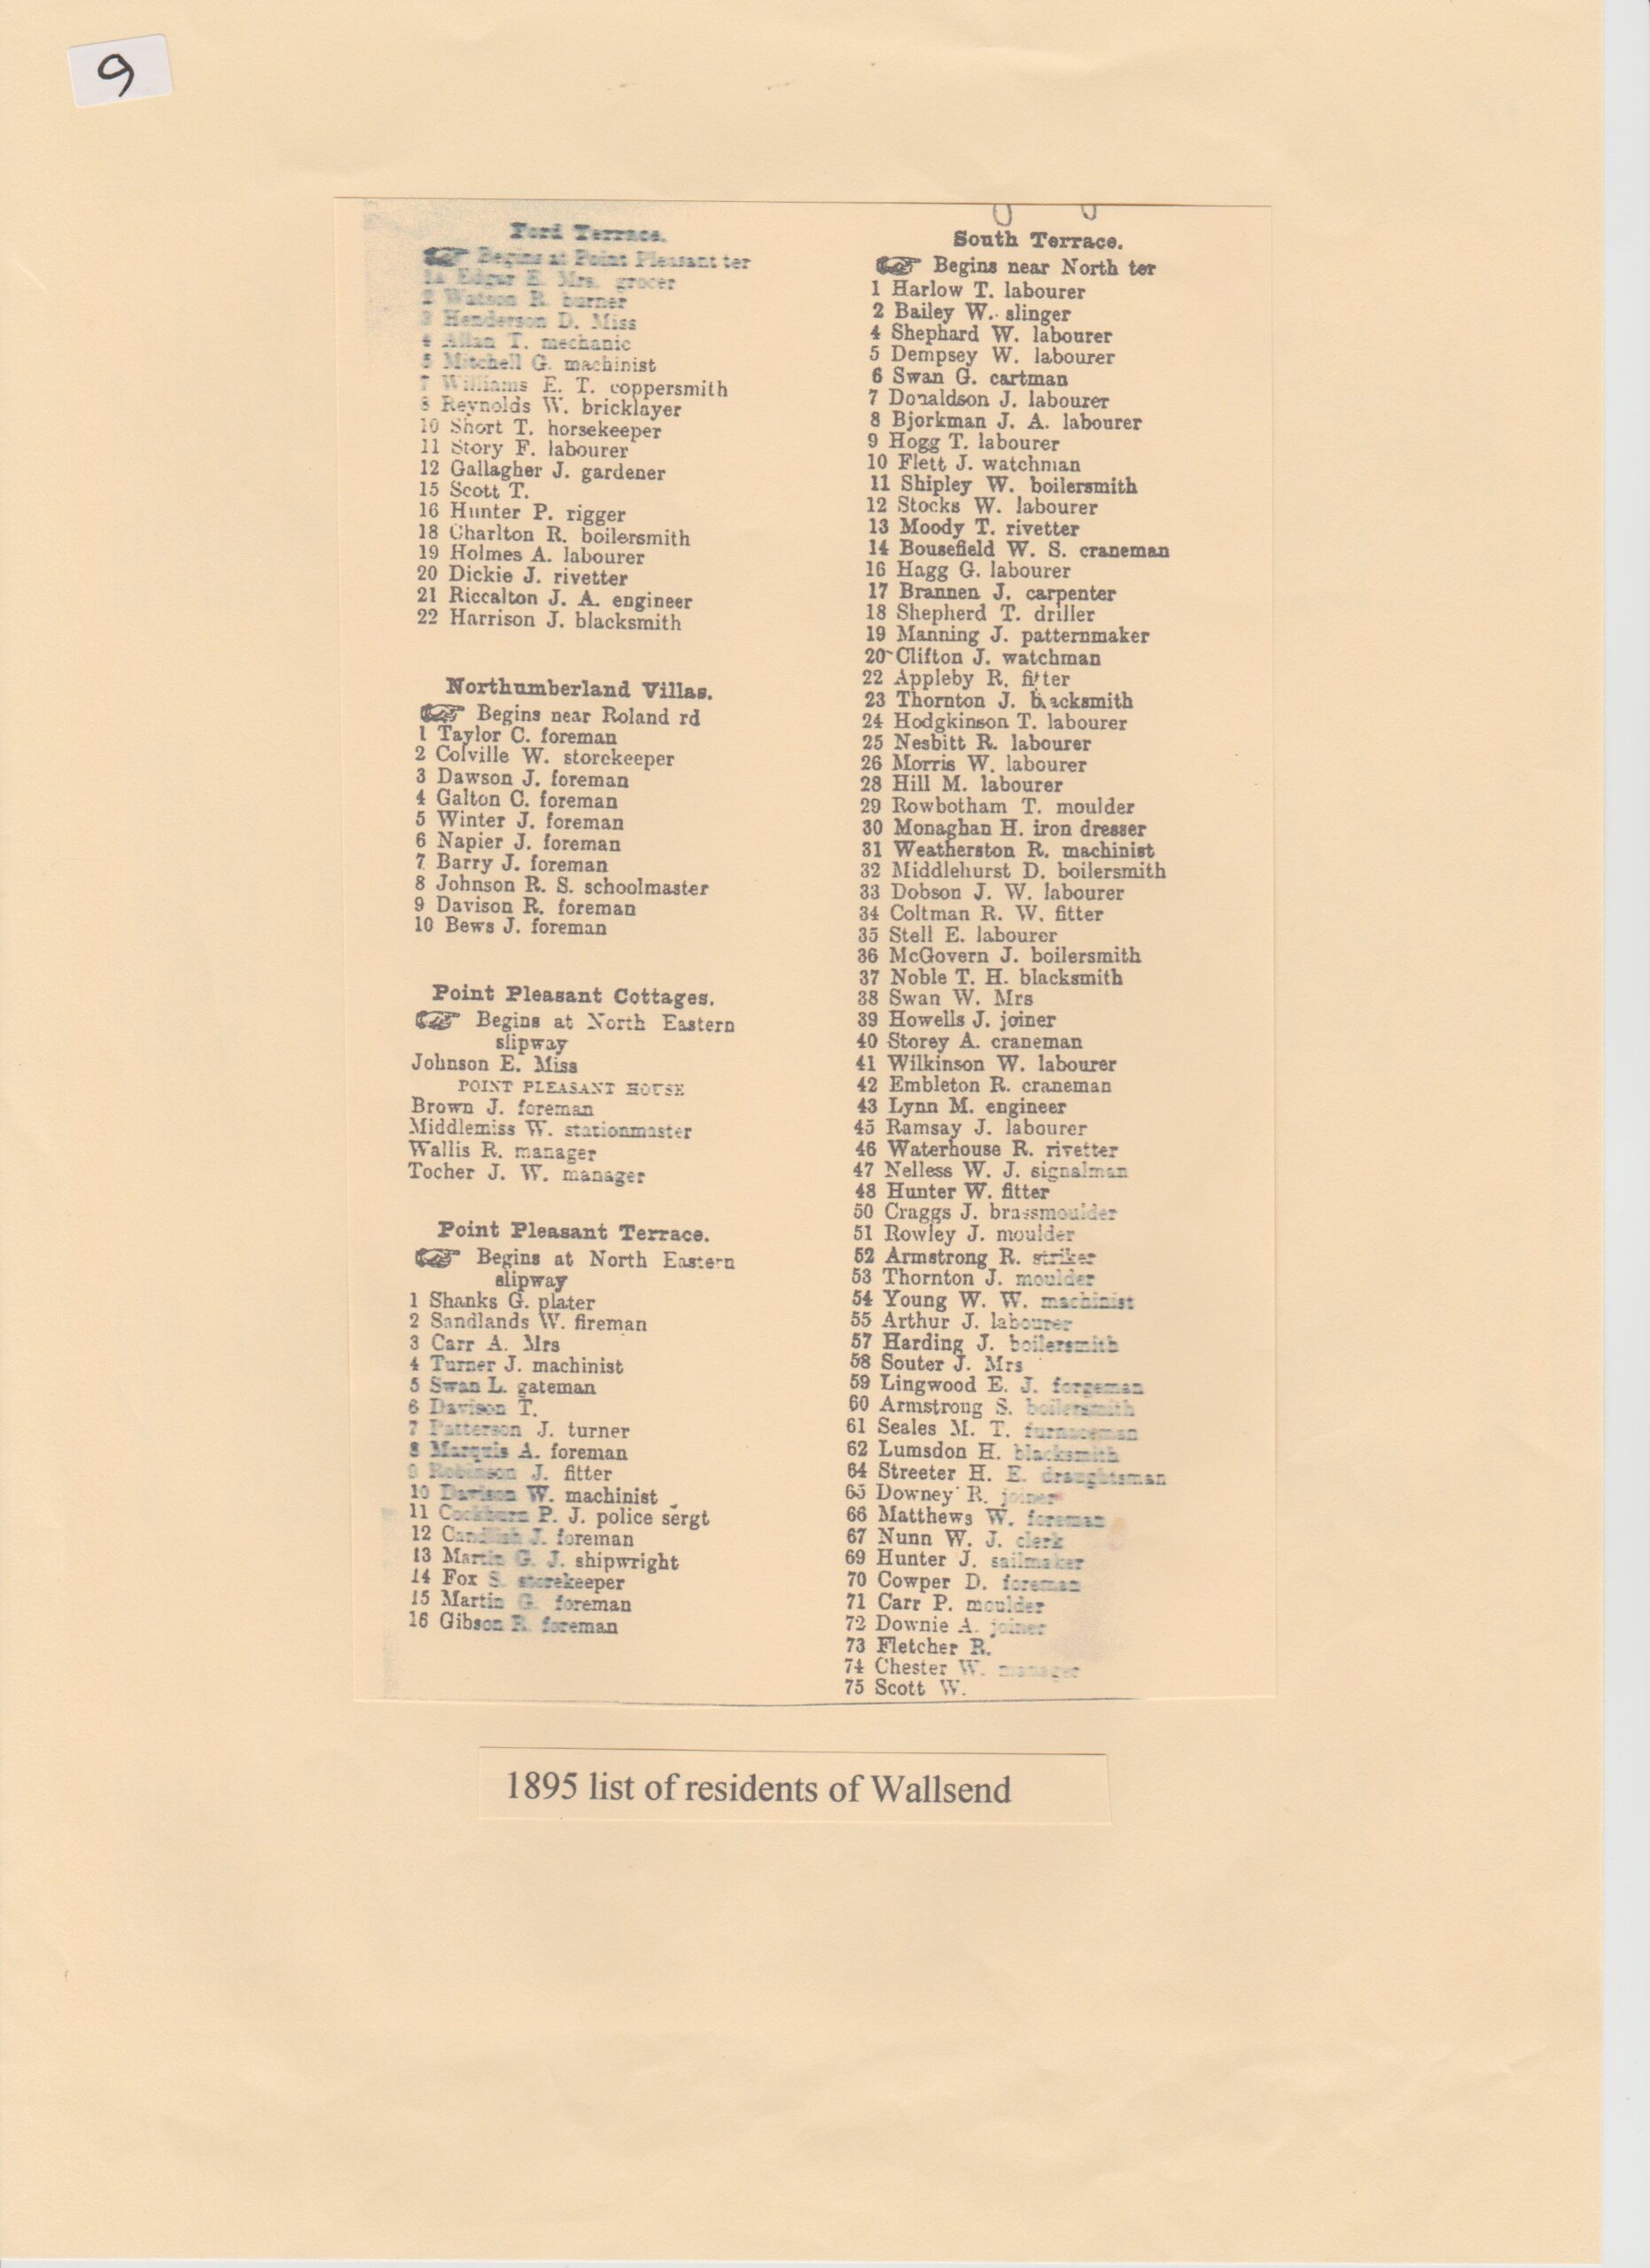 1895 List of Residents of Wallsend